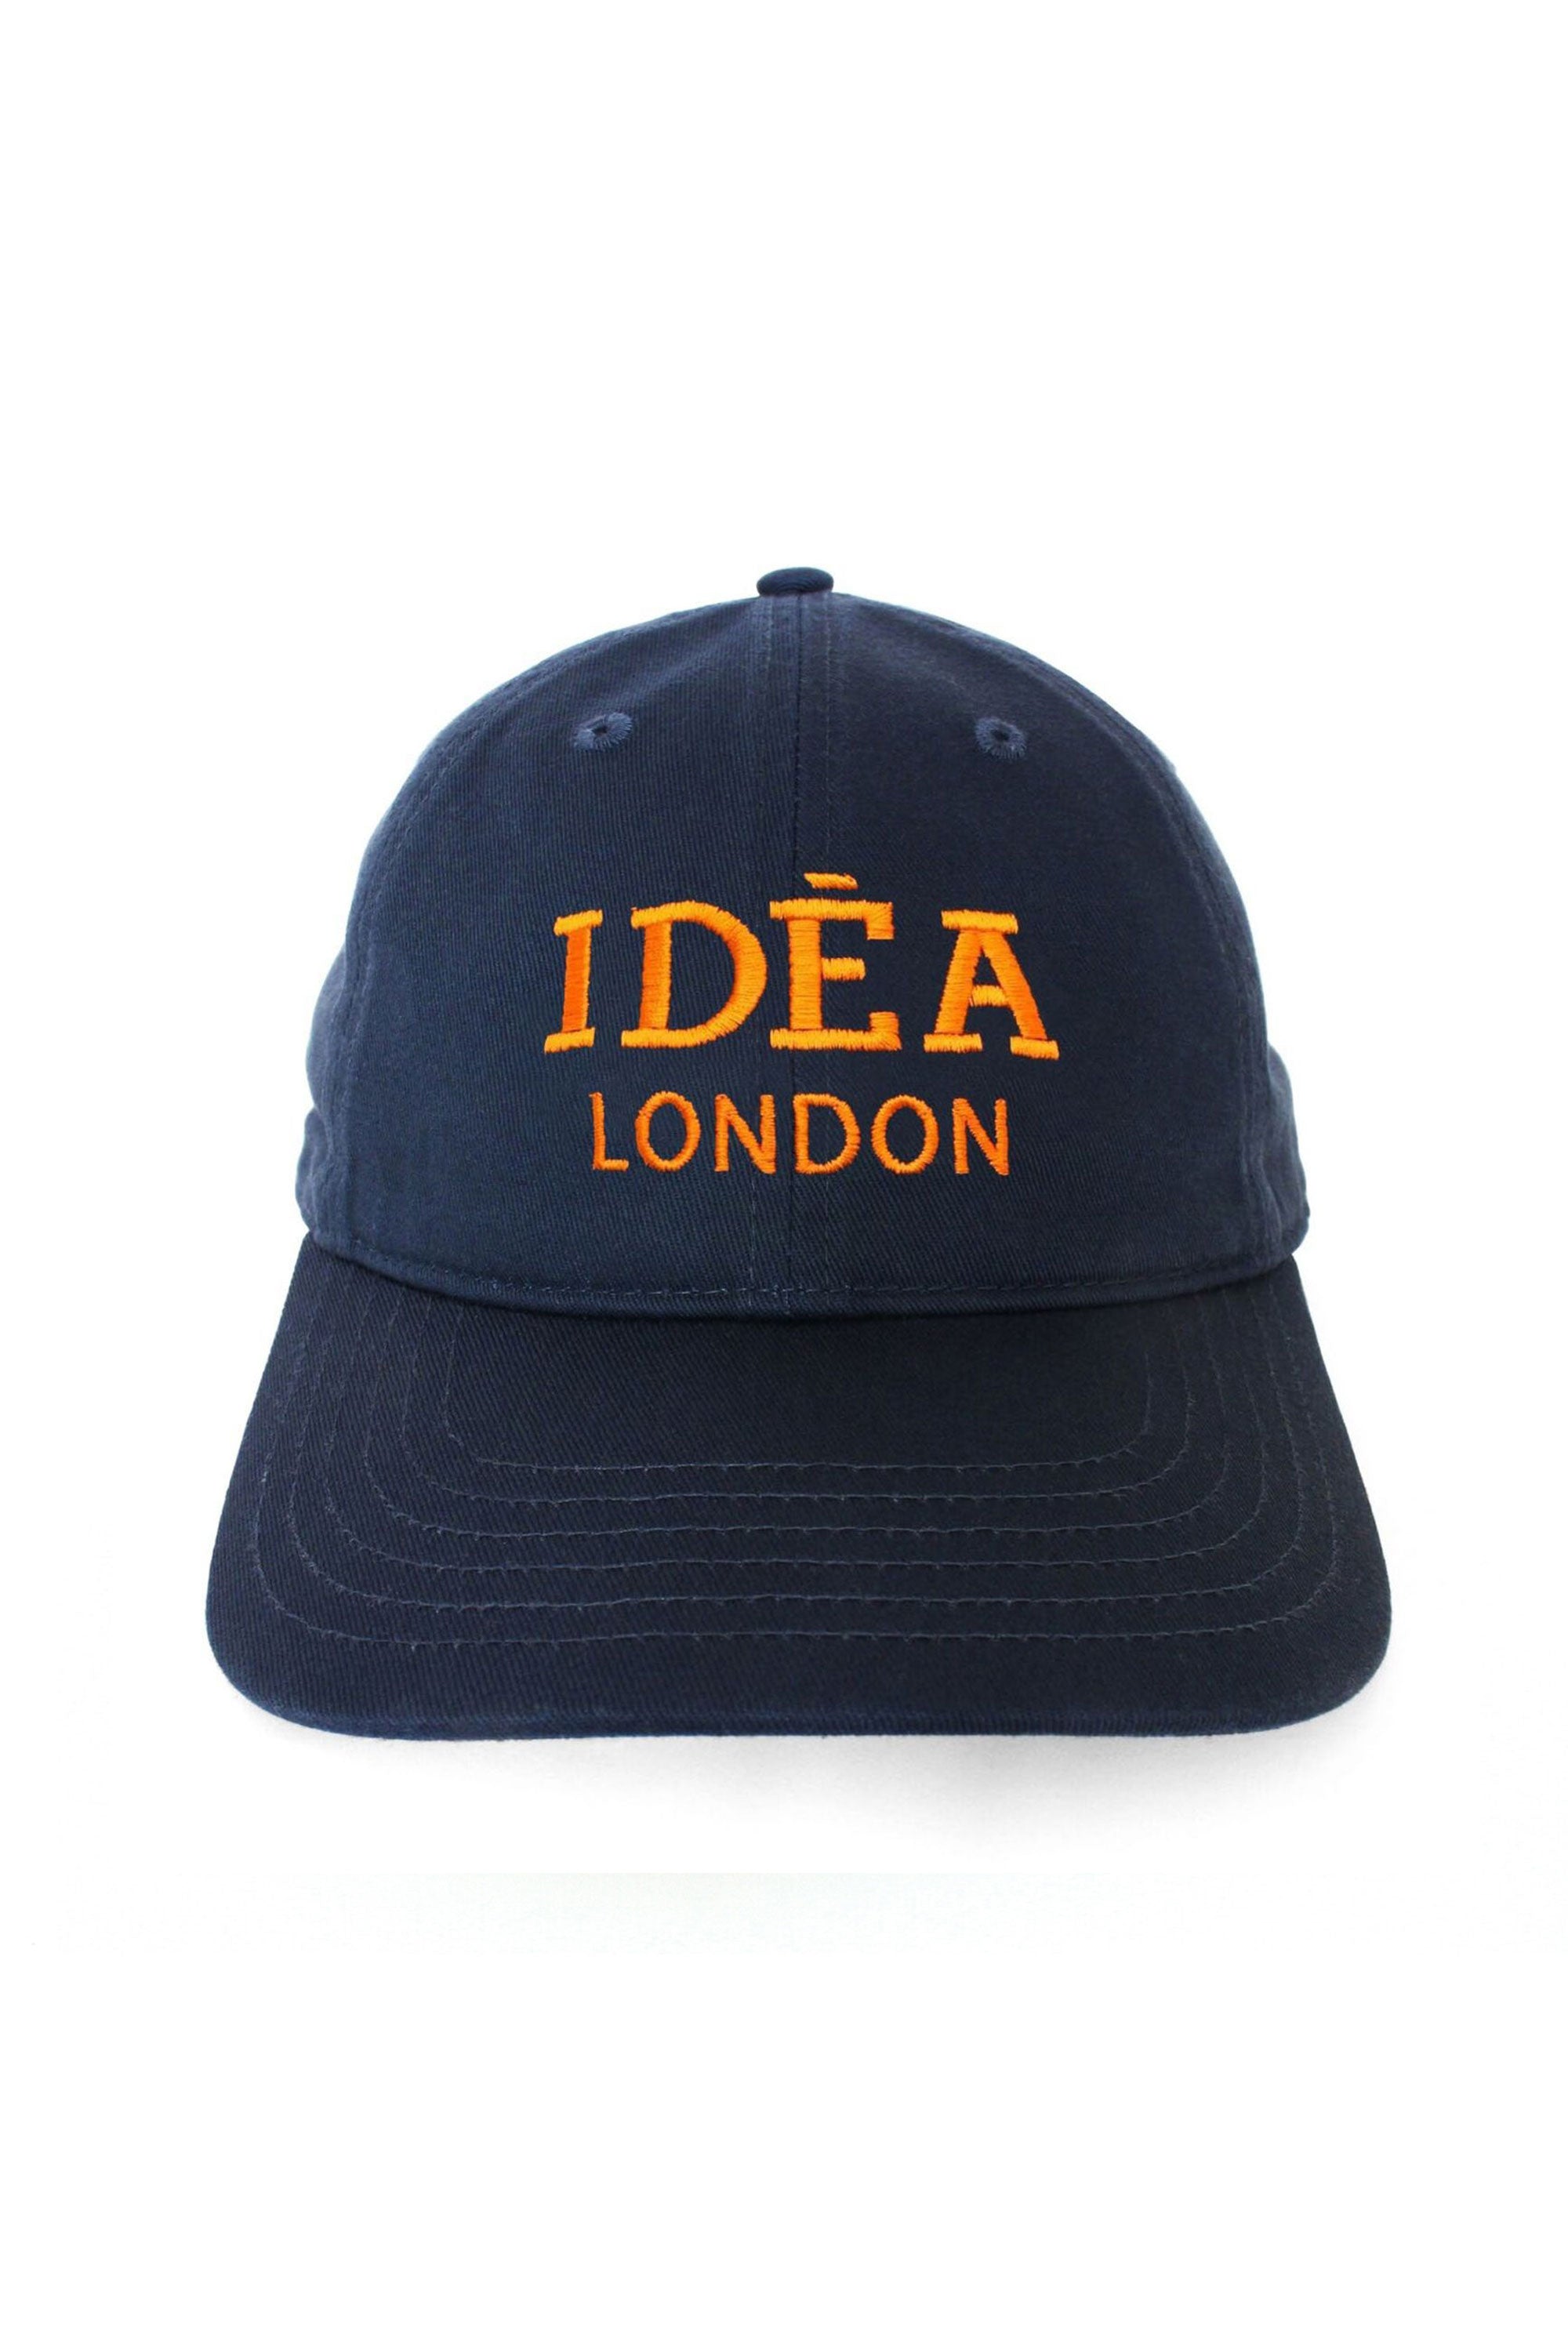 The IDEA - ID?A CAP  available online with global shipping, and in PAM Stores Melbourne and Sydney.